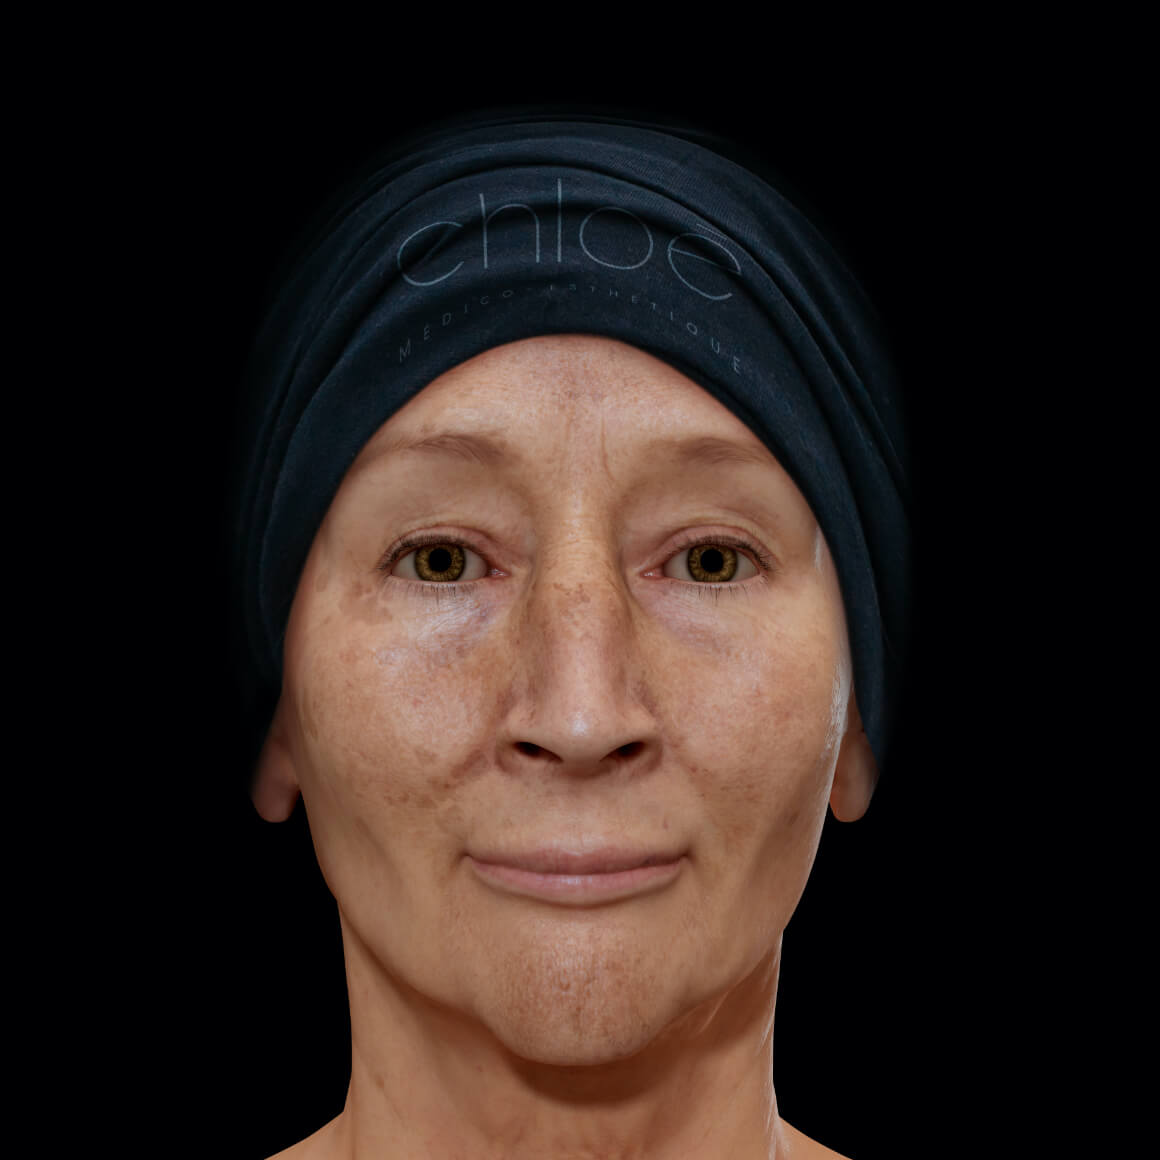 Female patient at Clinique Chloé front view with melasma on her face